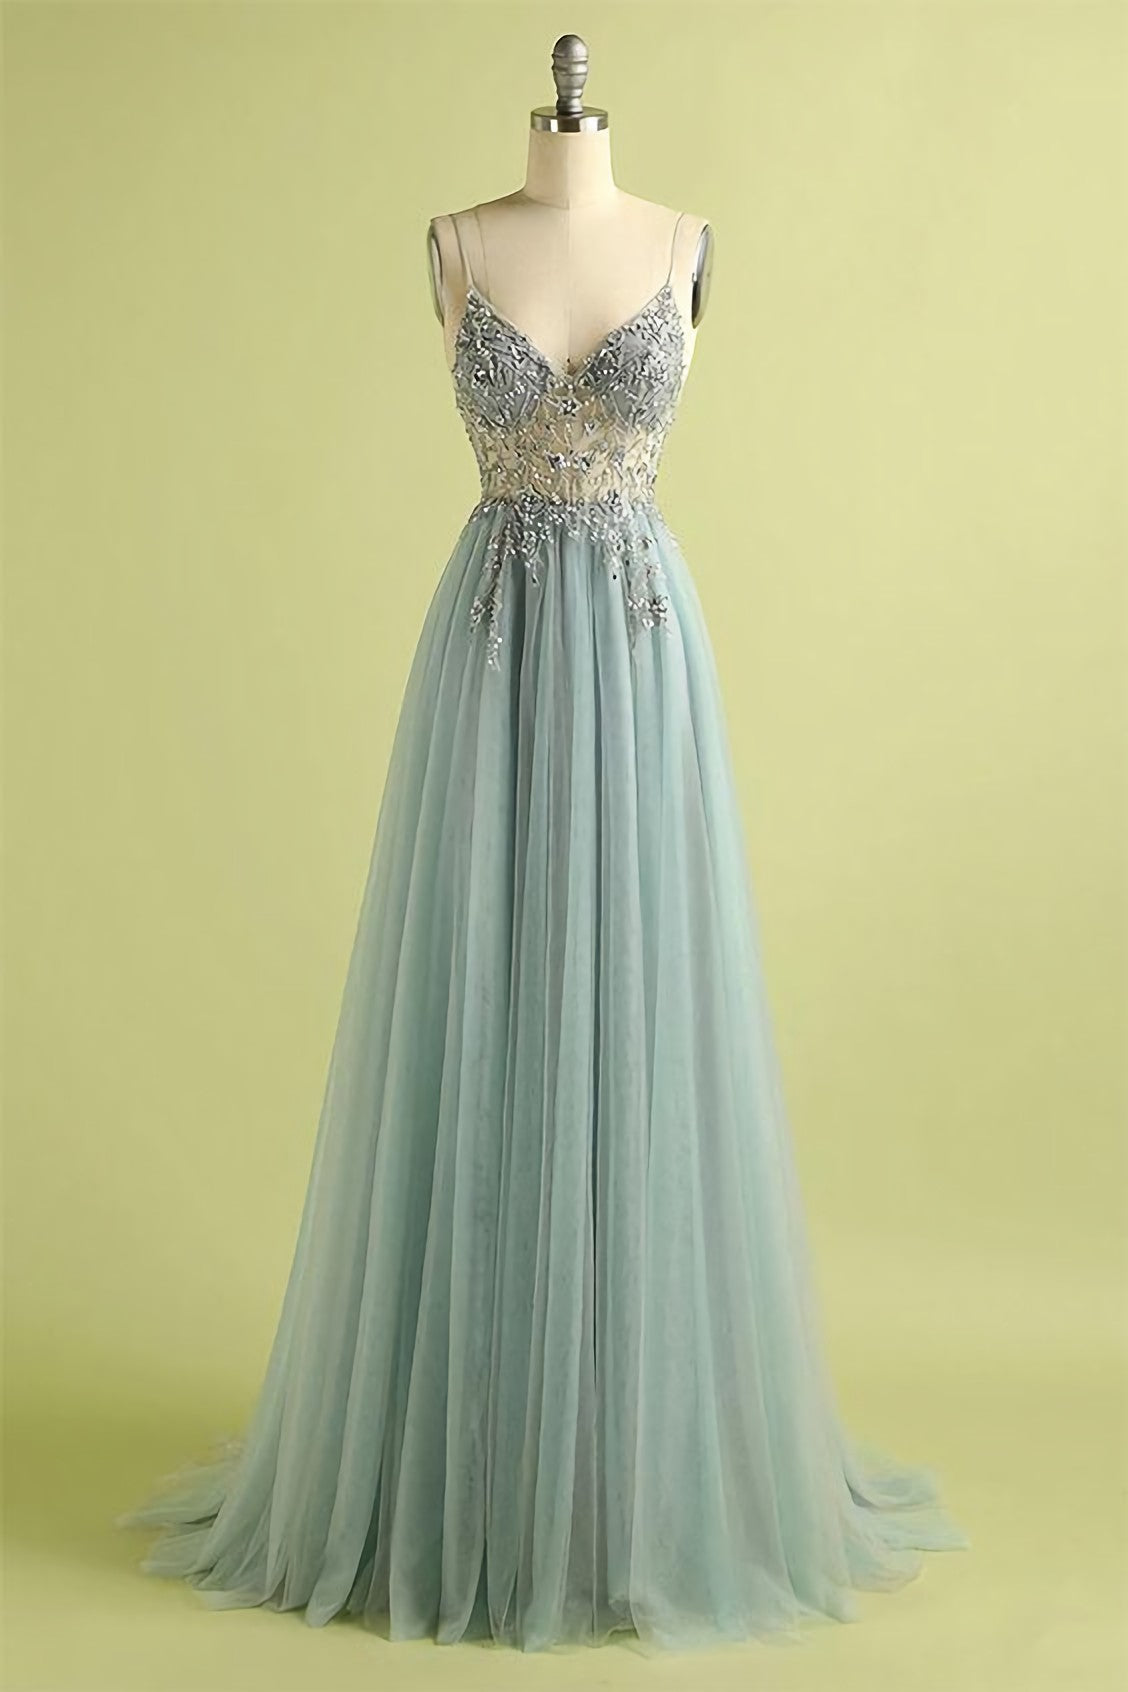 Prom Dresses Fitted, Long Prom Dress, Inspiration Junior Prom Gowns